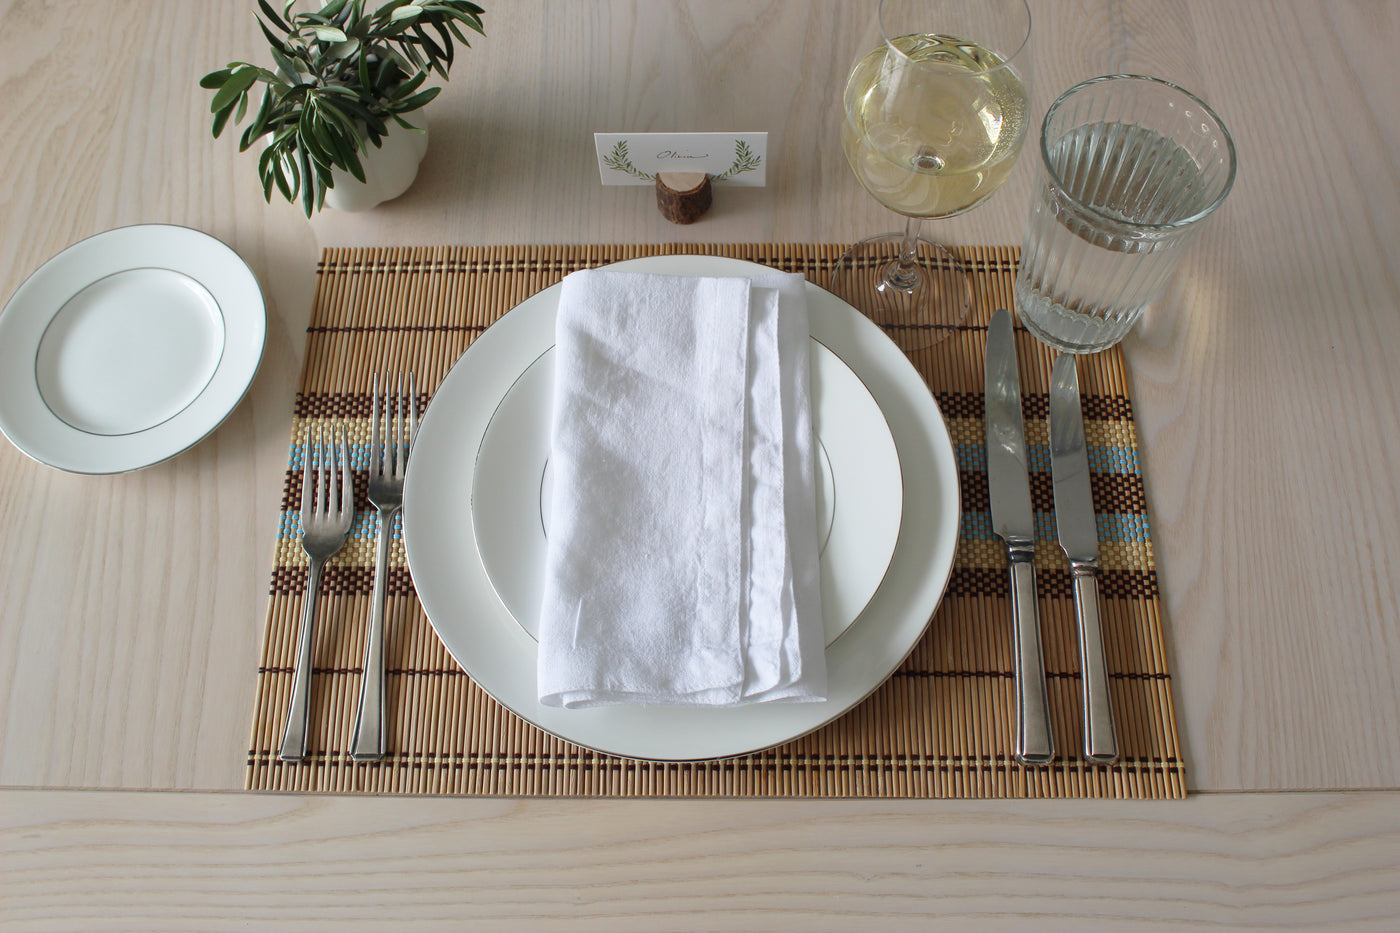 Why Real Napkins?